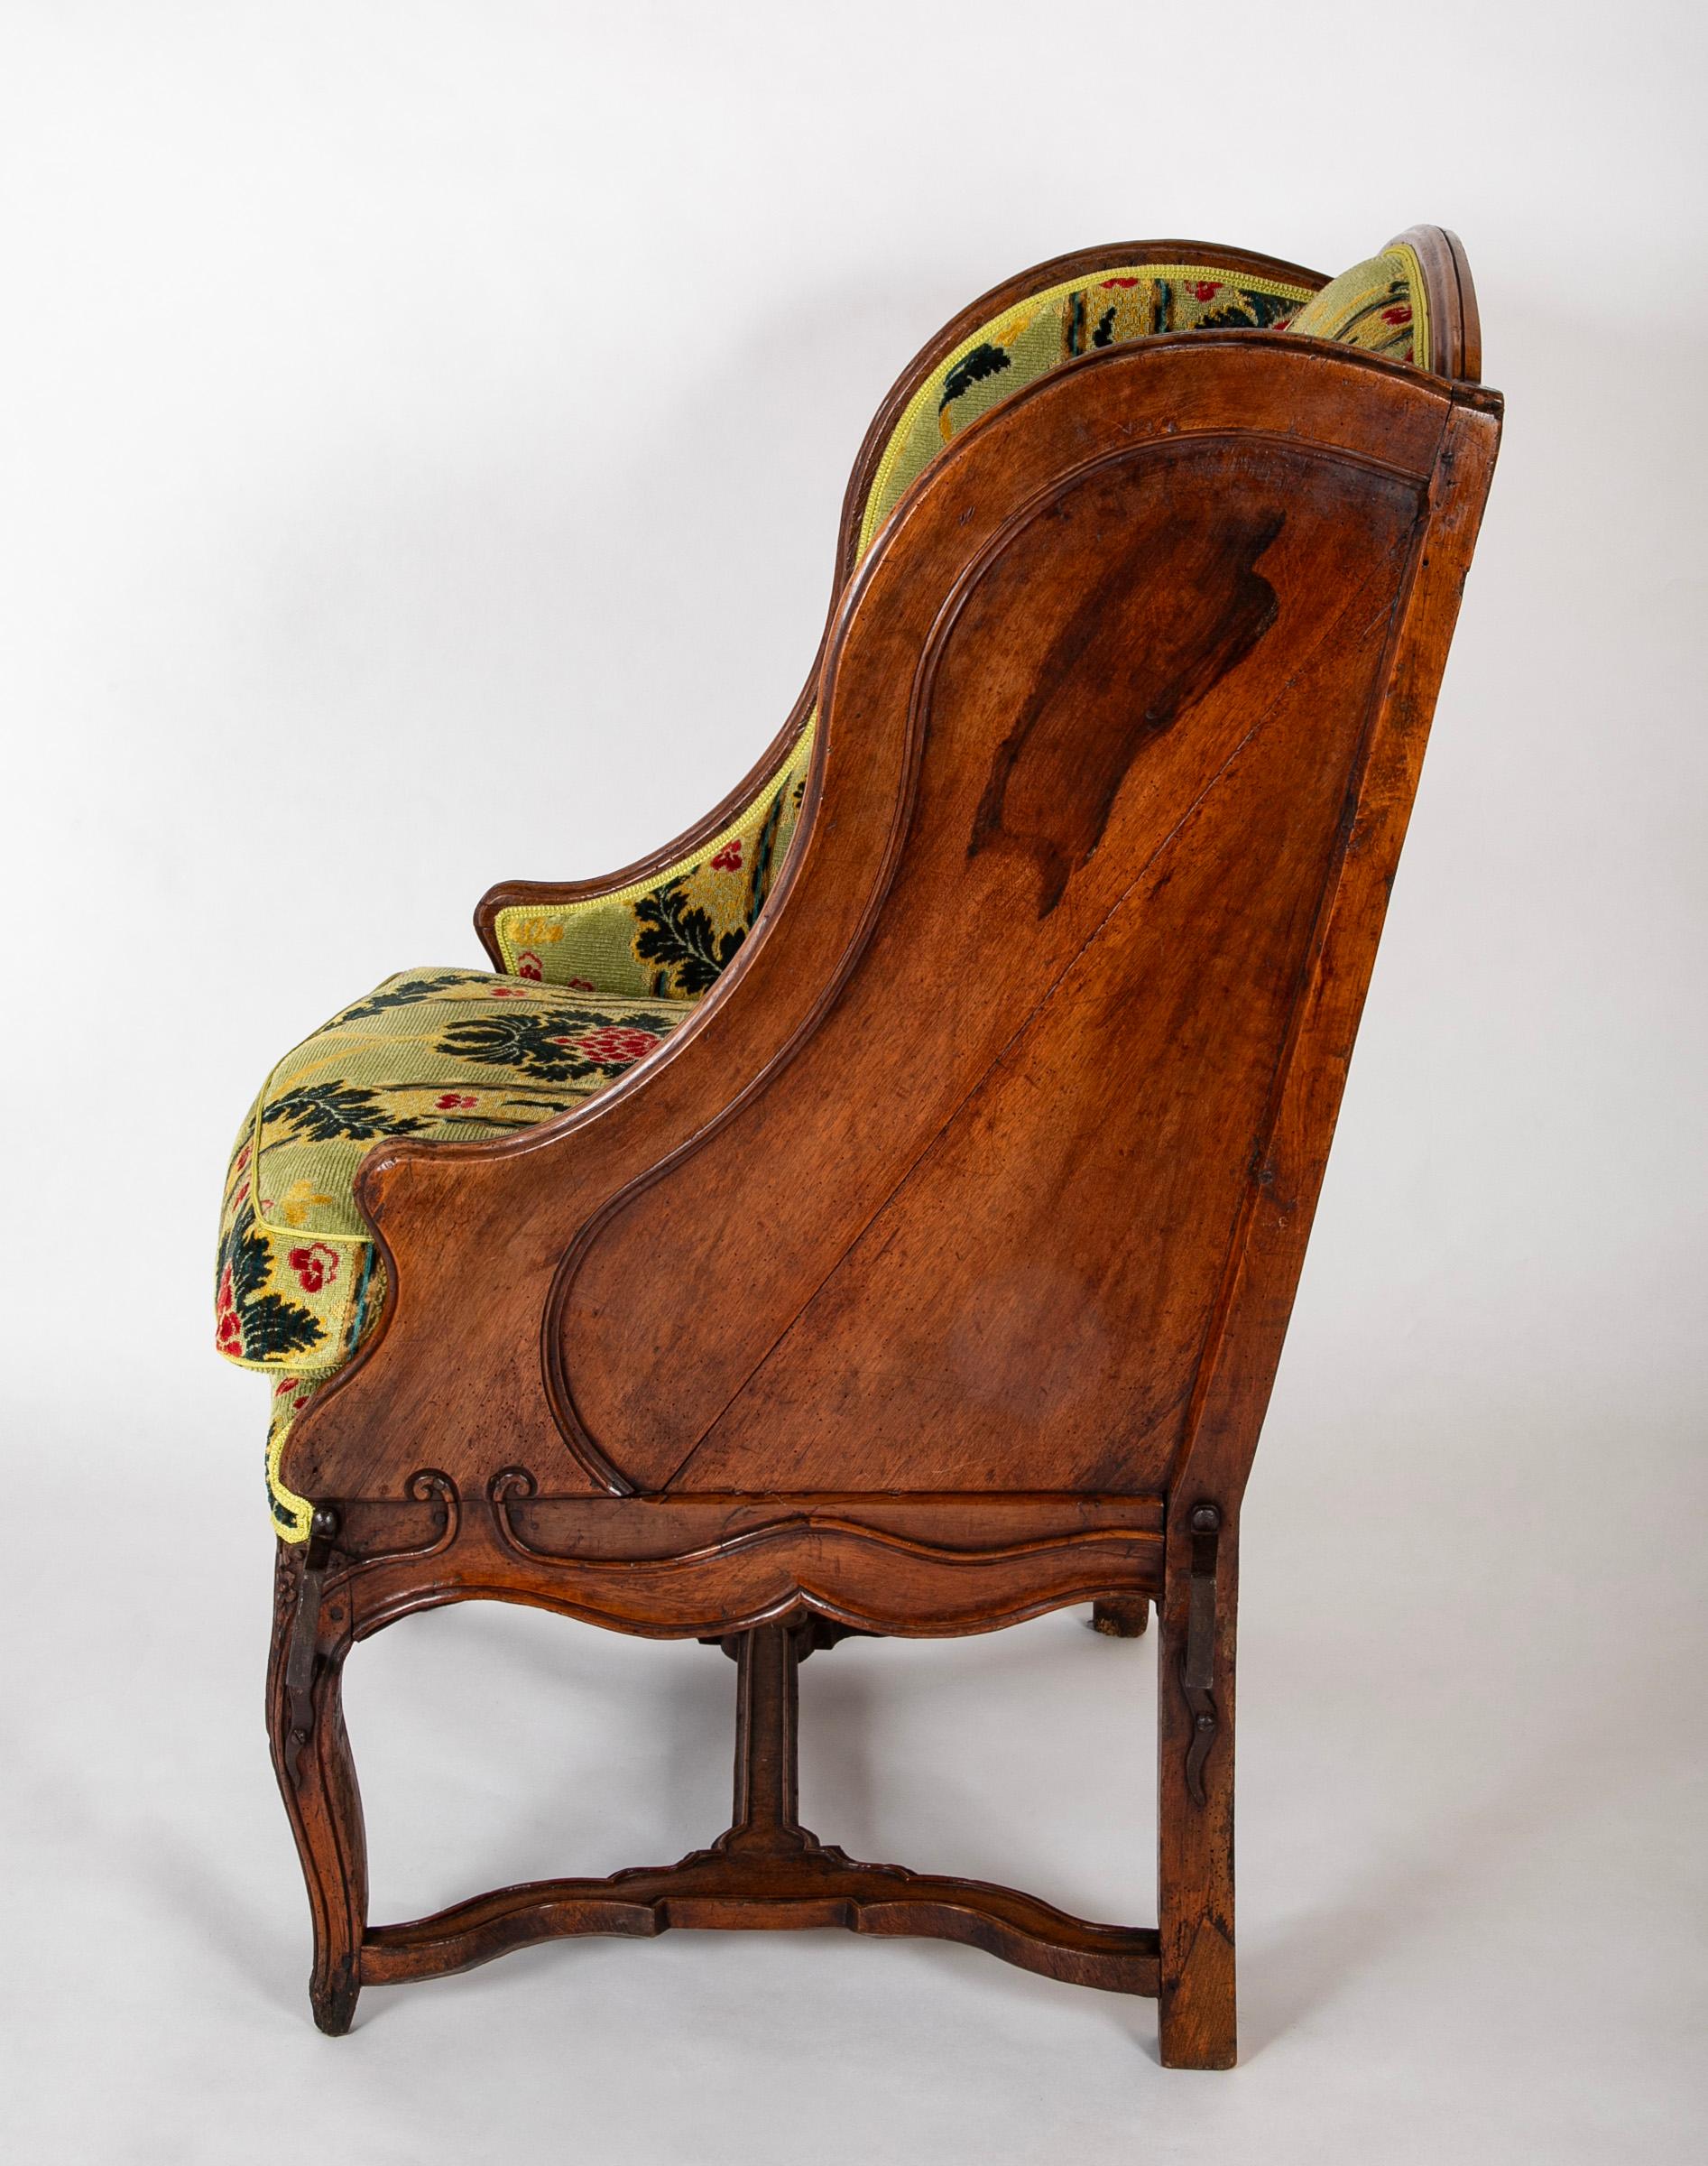 A Grand Scale French Louis XV Period Carved Walnut Armchair For Sale 3